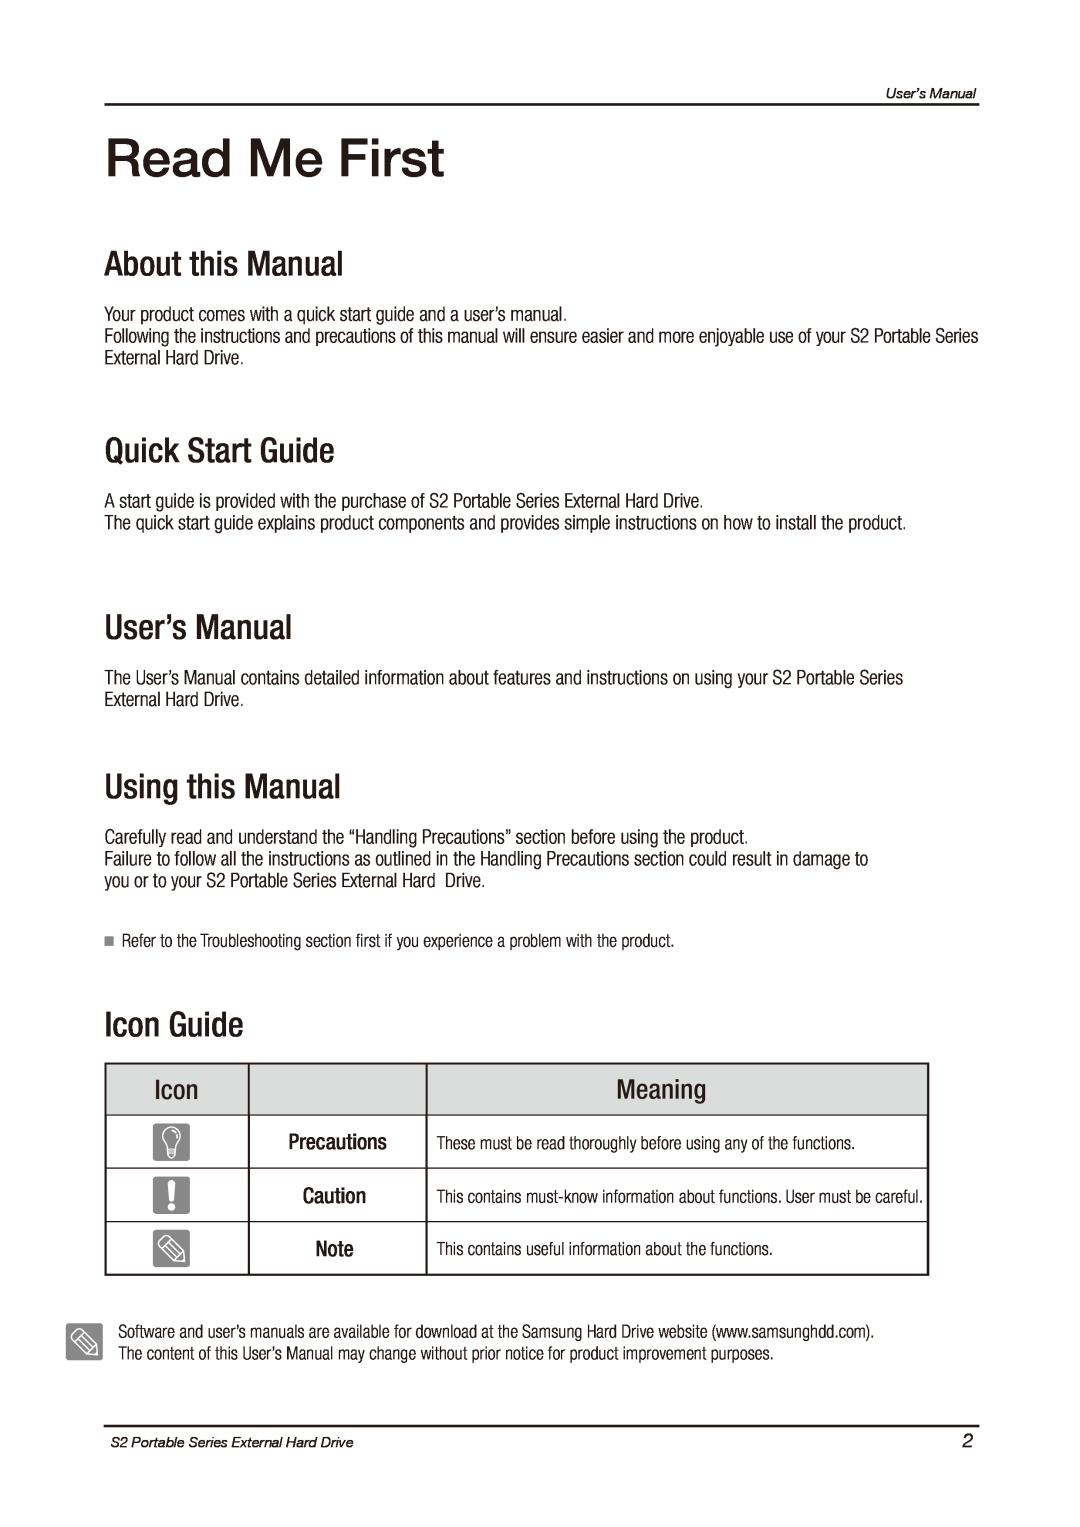 Samsung HXMU016DA Read Me First, About this Manual, Quick Start Guide, User’s Manual, Using this Manual, Icon Guide 